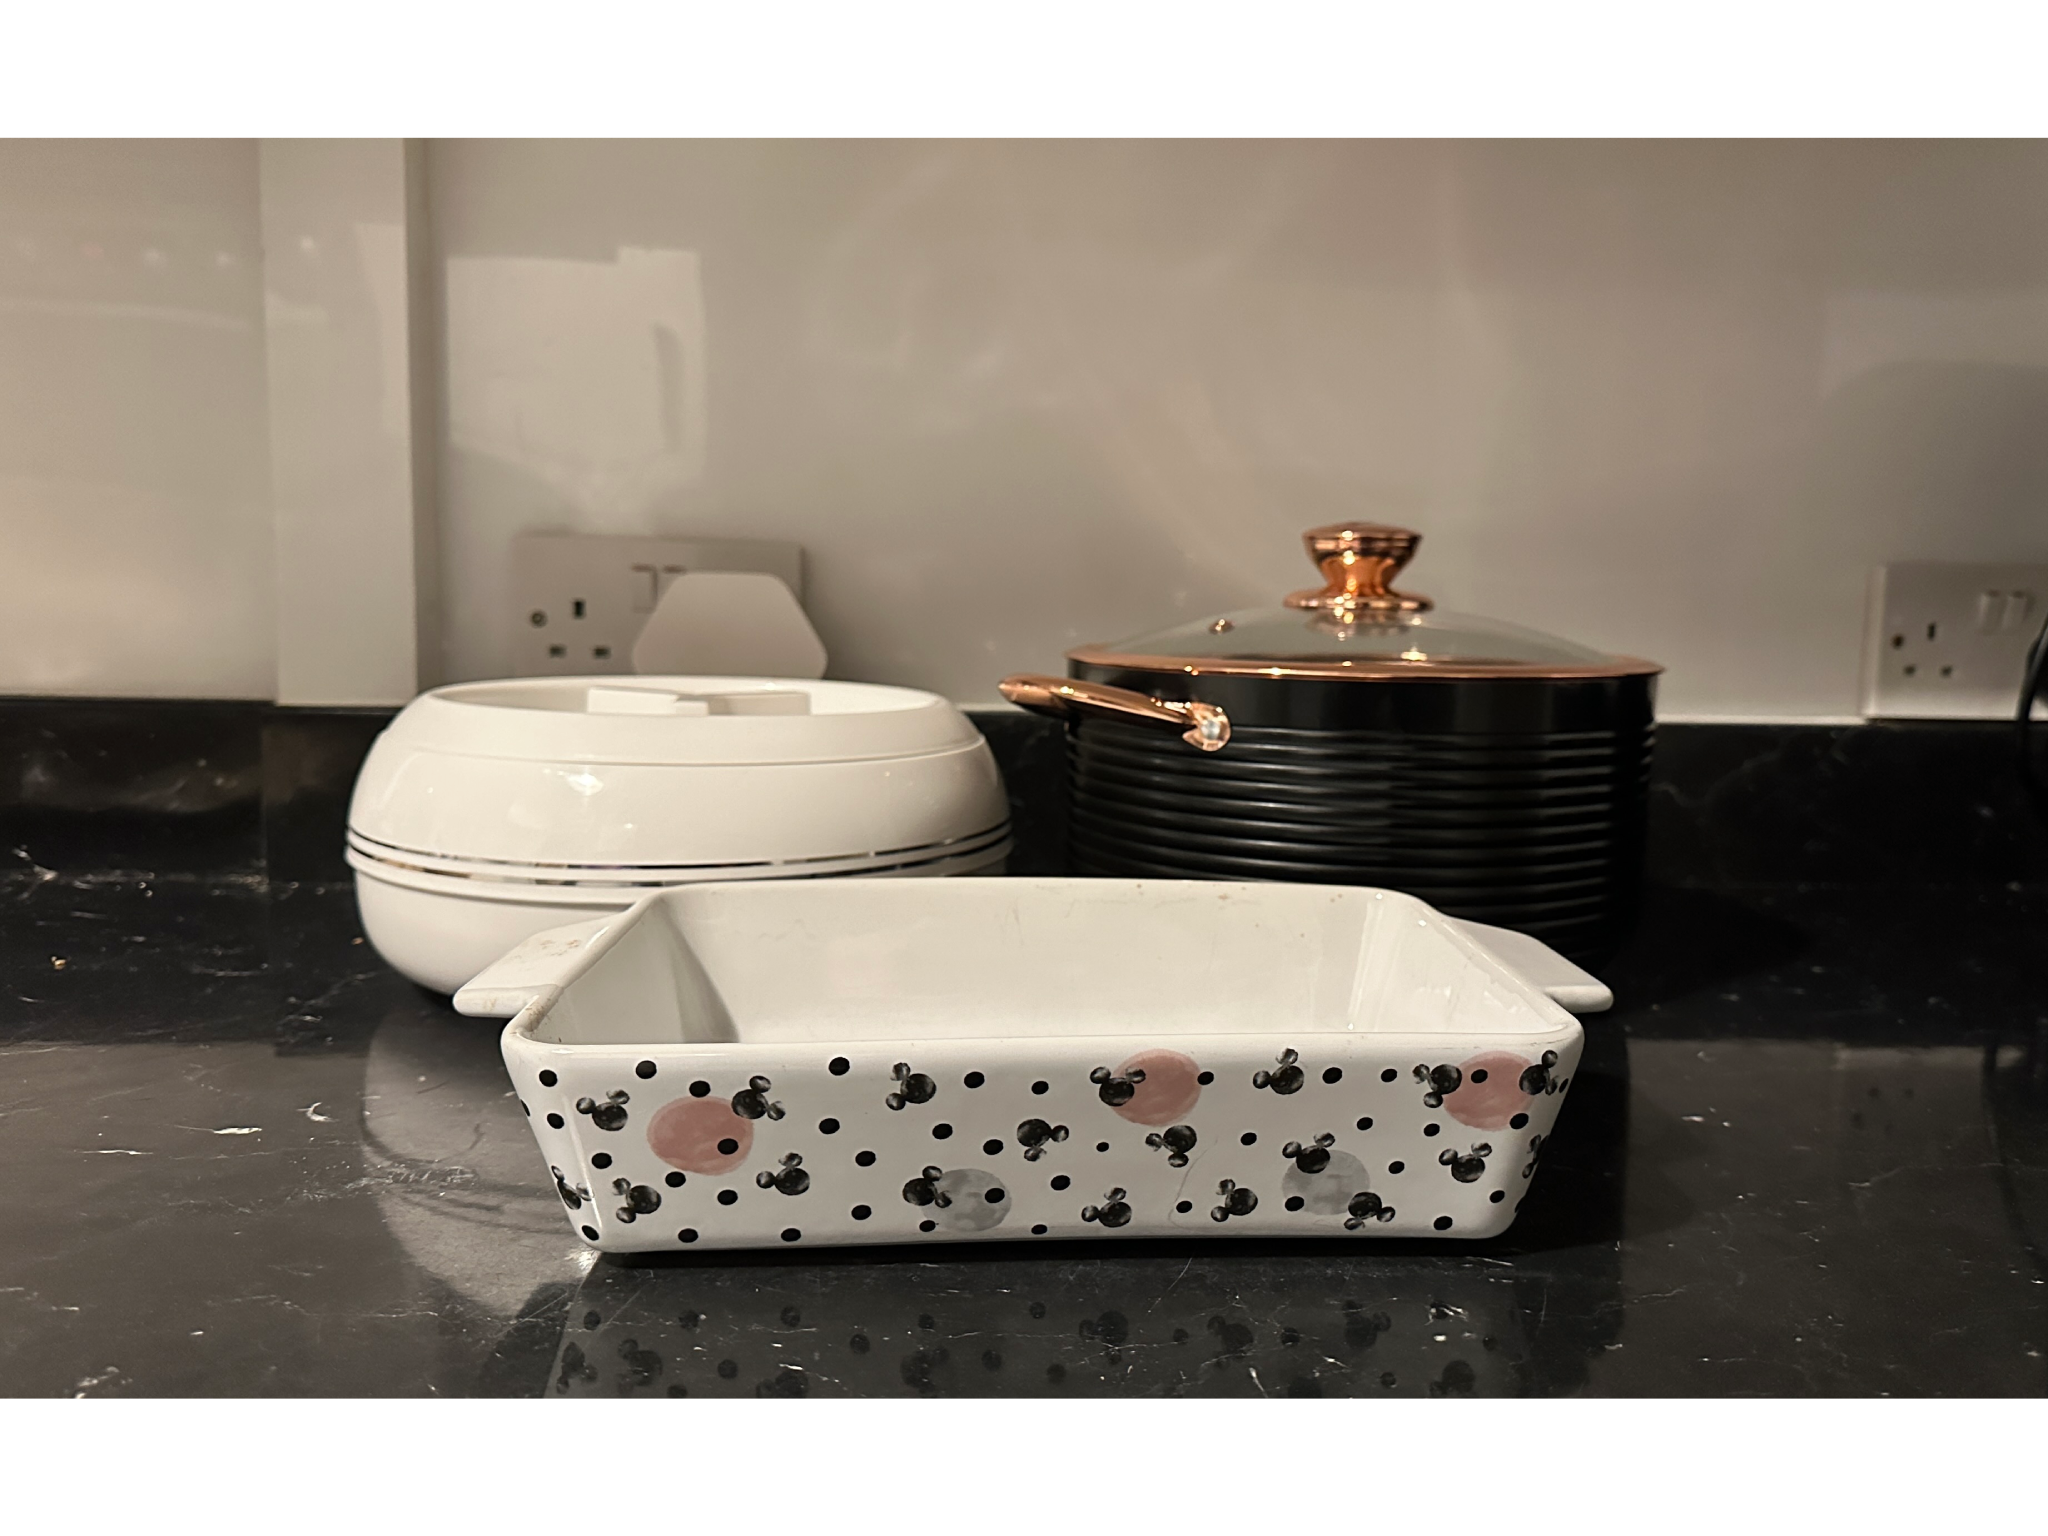 The 4 Best Casserole Dishes to Buy in 2023 (Tested & Reviewed)